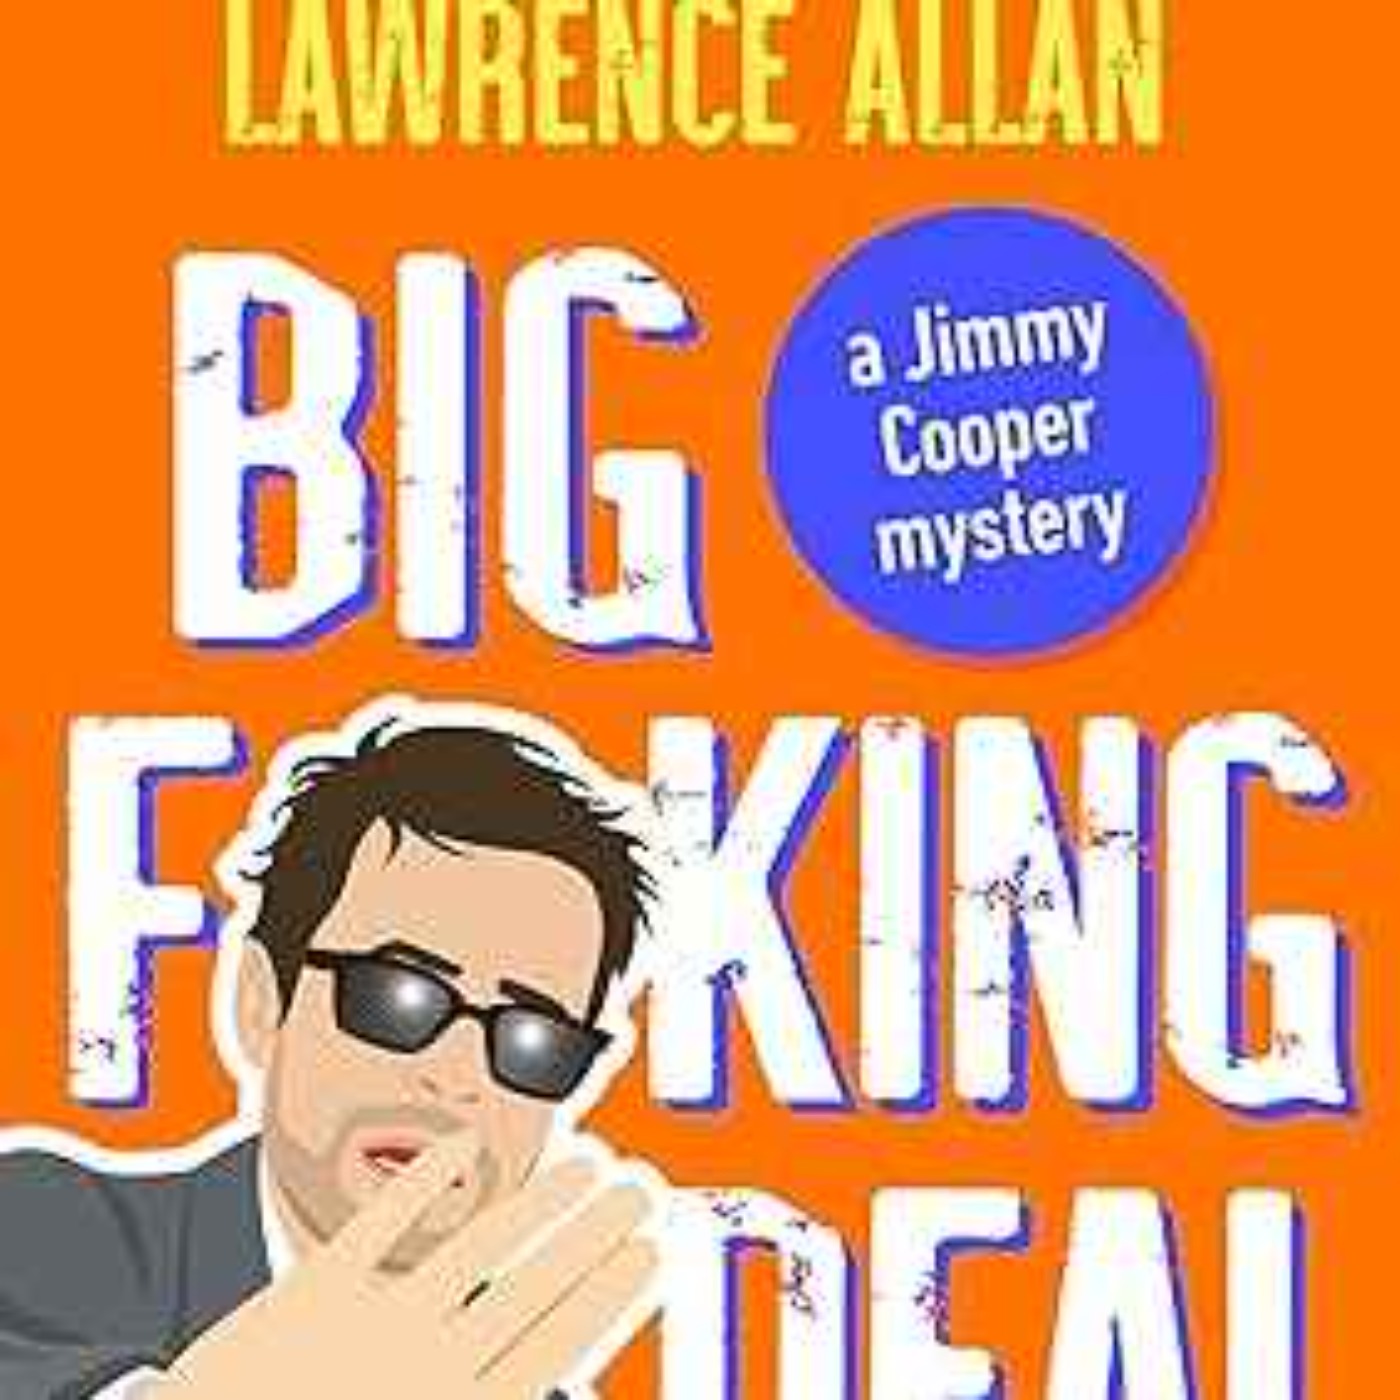 cover art for Lawrence Allan - Big F@!king Deal: A Jimmy Cooper Mystery (clean)